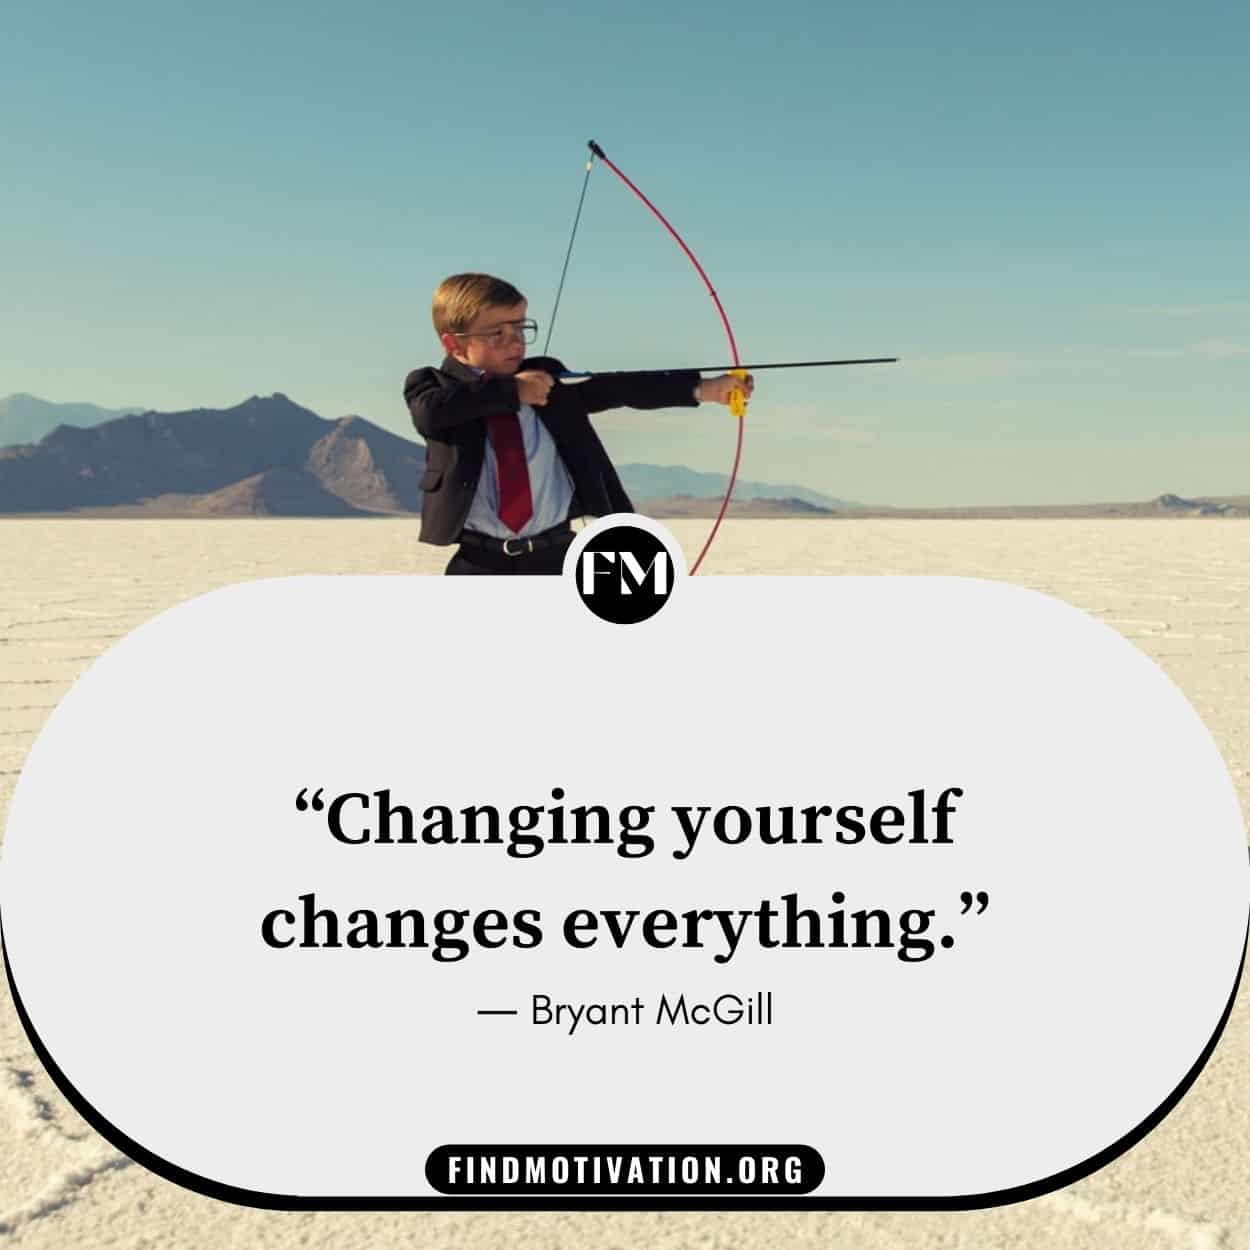 Inspirational personal growth quotes to make yourself better in your daily life